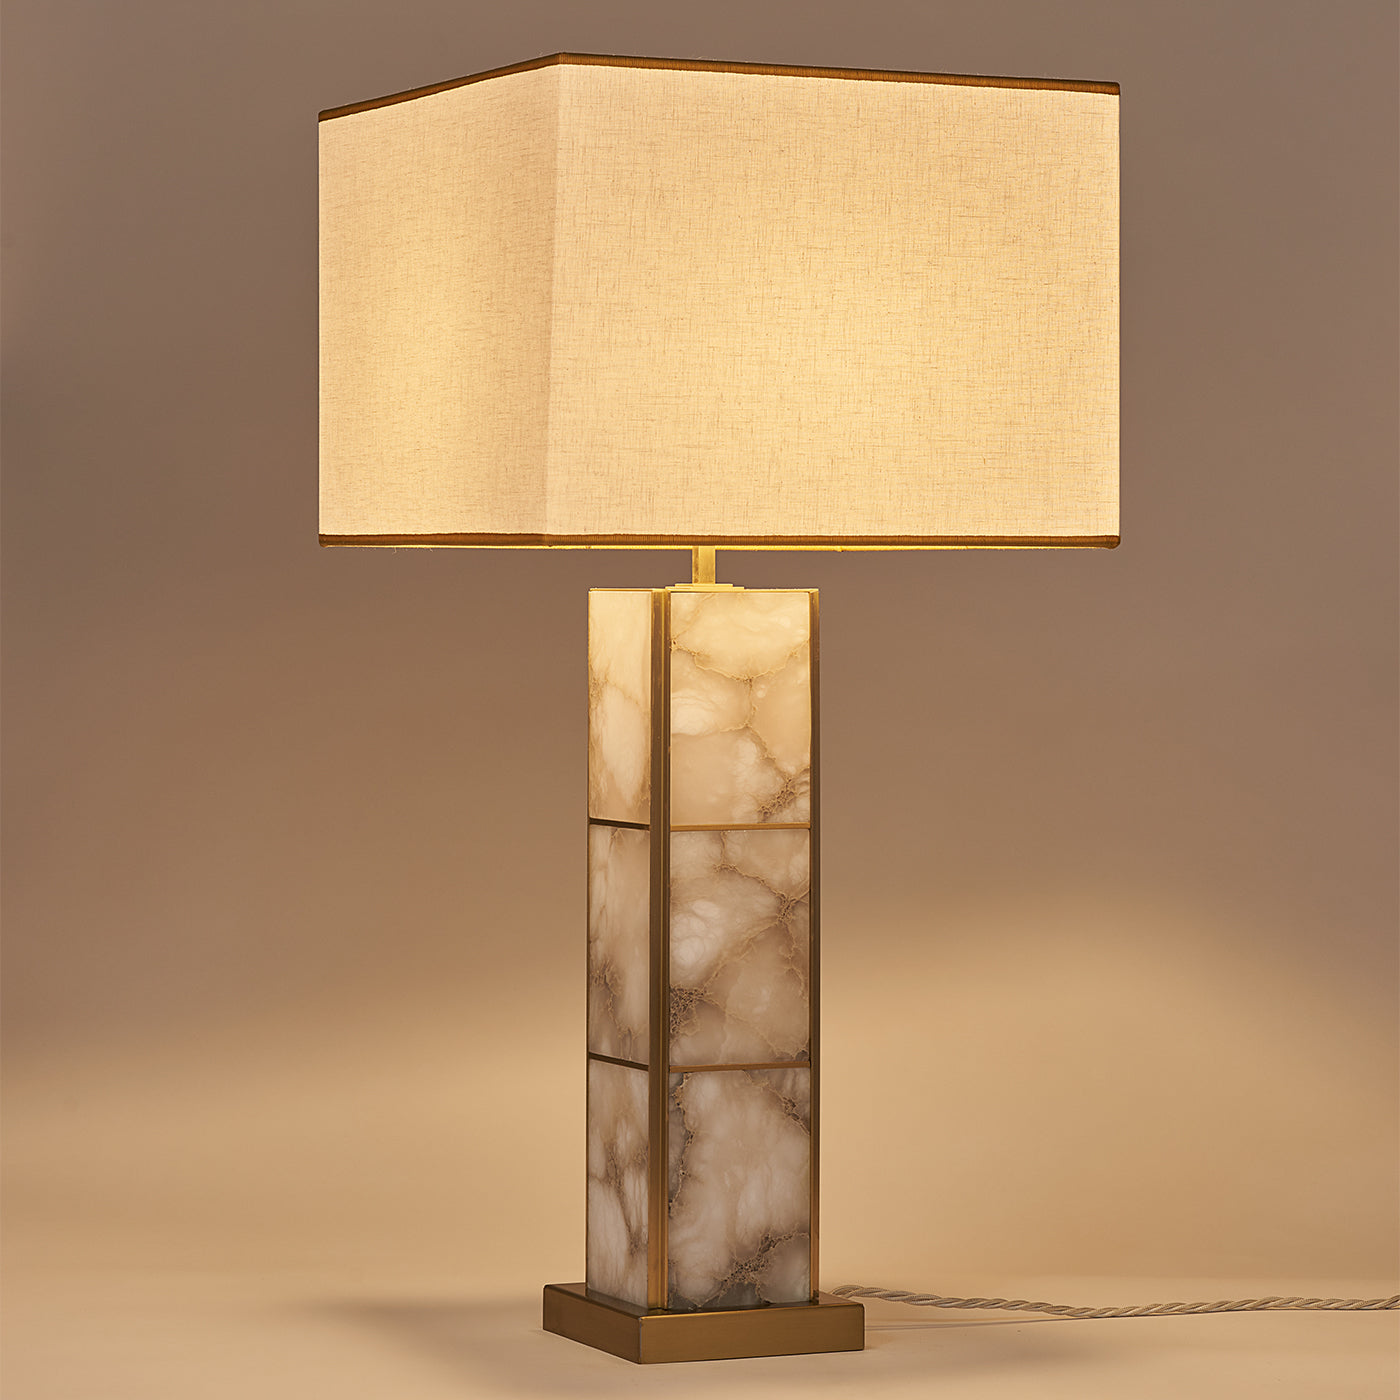 "Mole" Table Lamp in Satin Brass and Alabaster - Alternative view 3